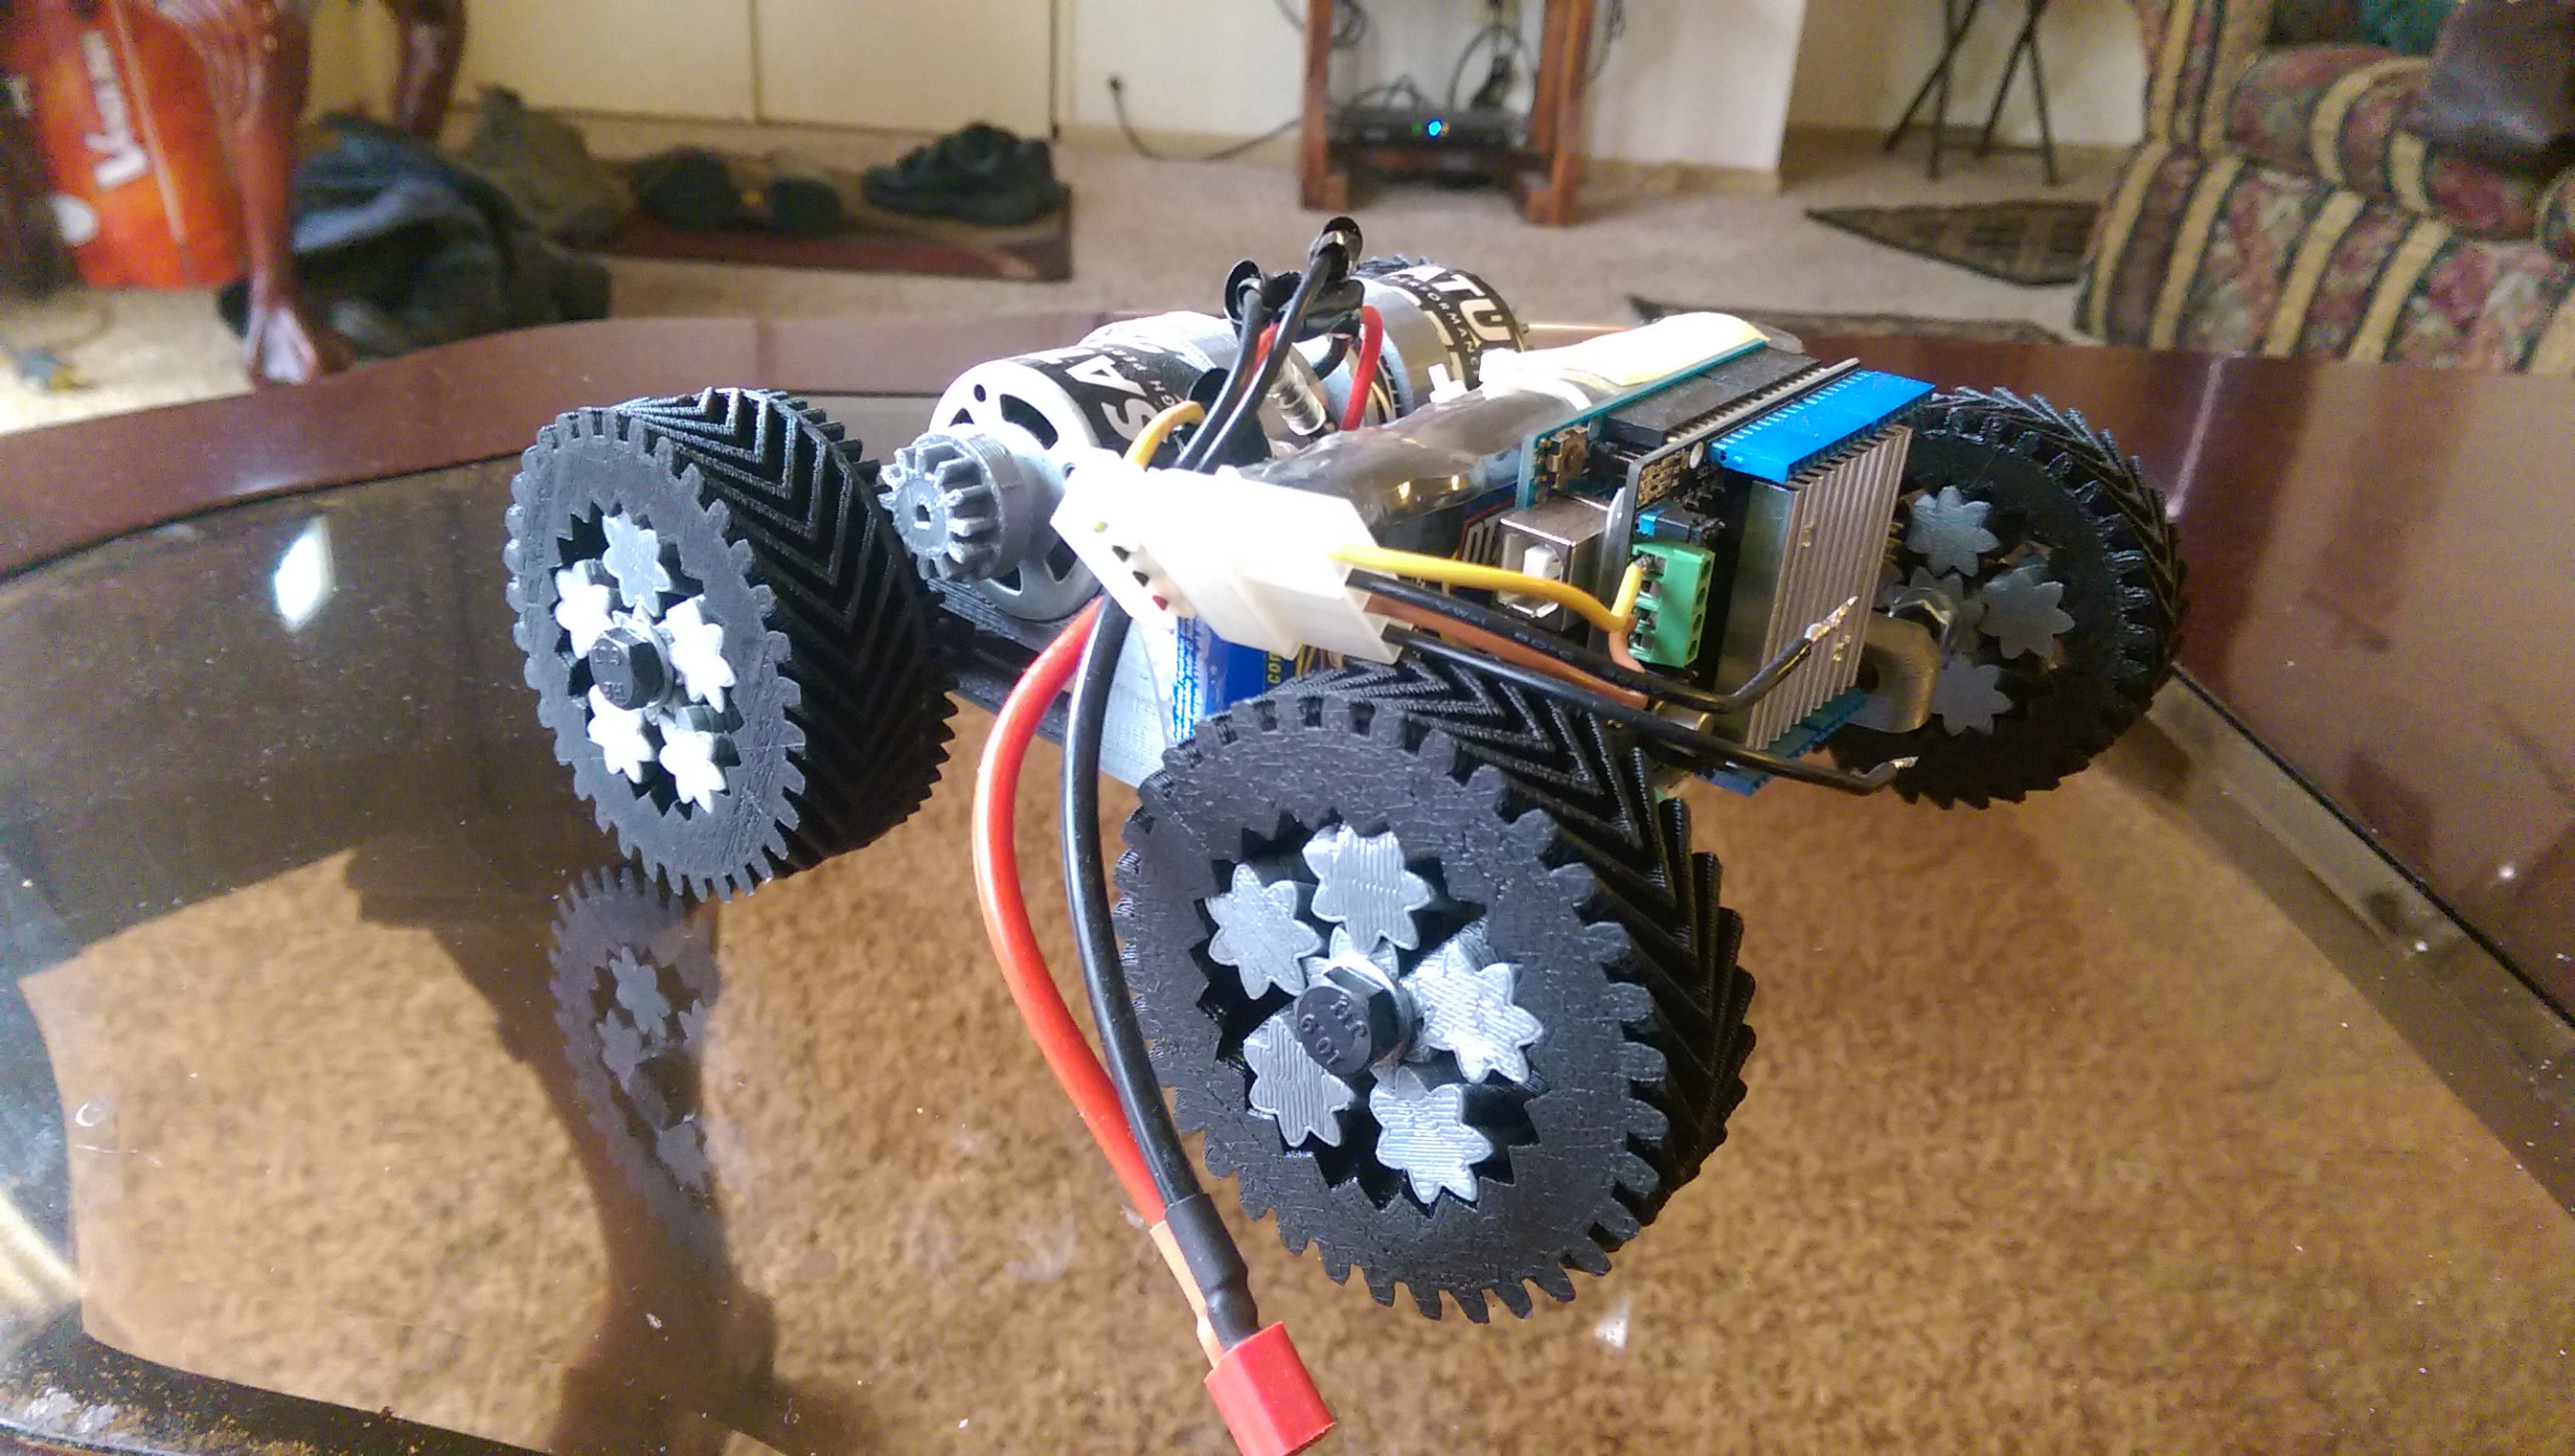 Lowcost Robot Chassis (beta)